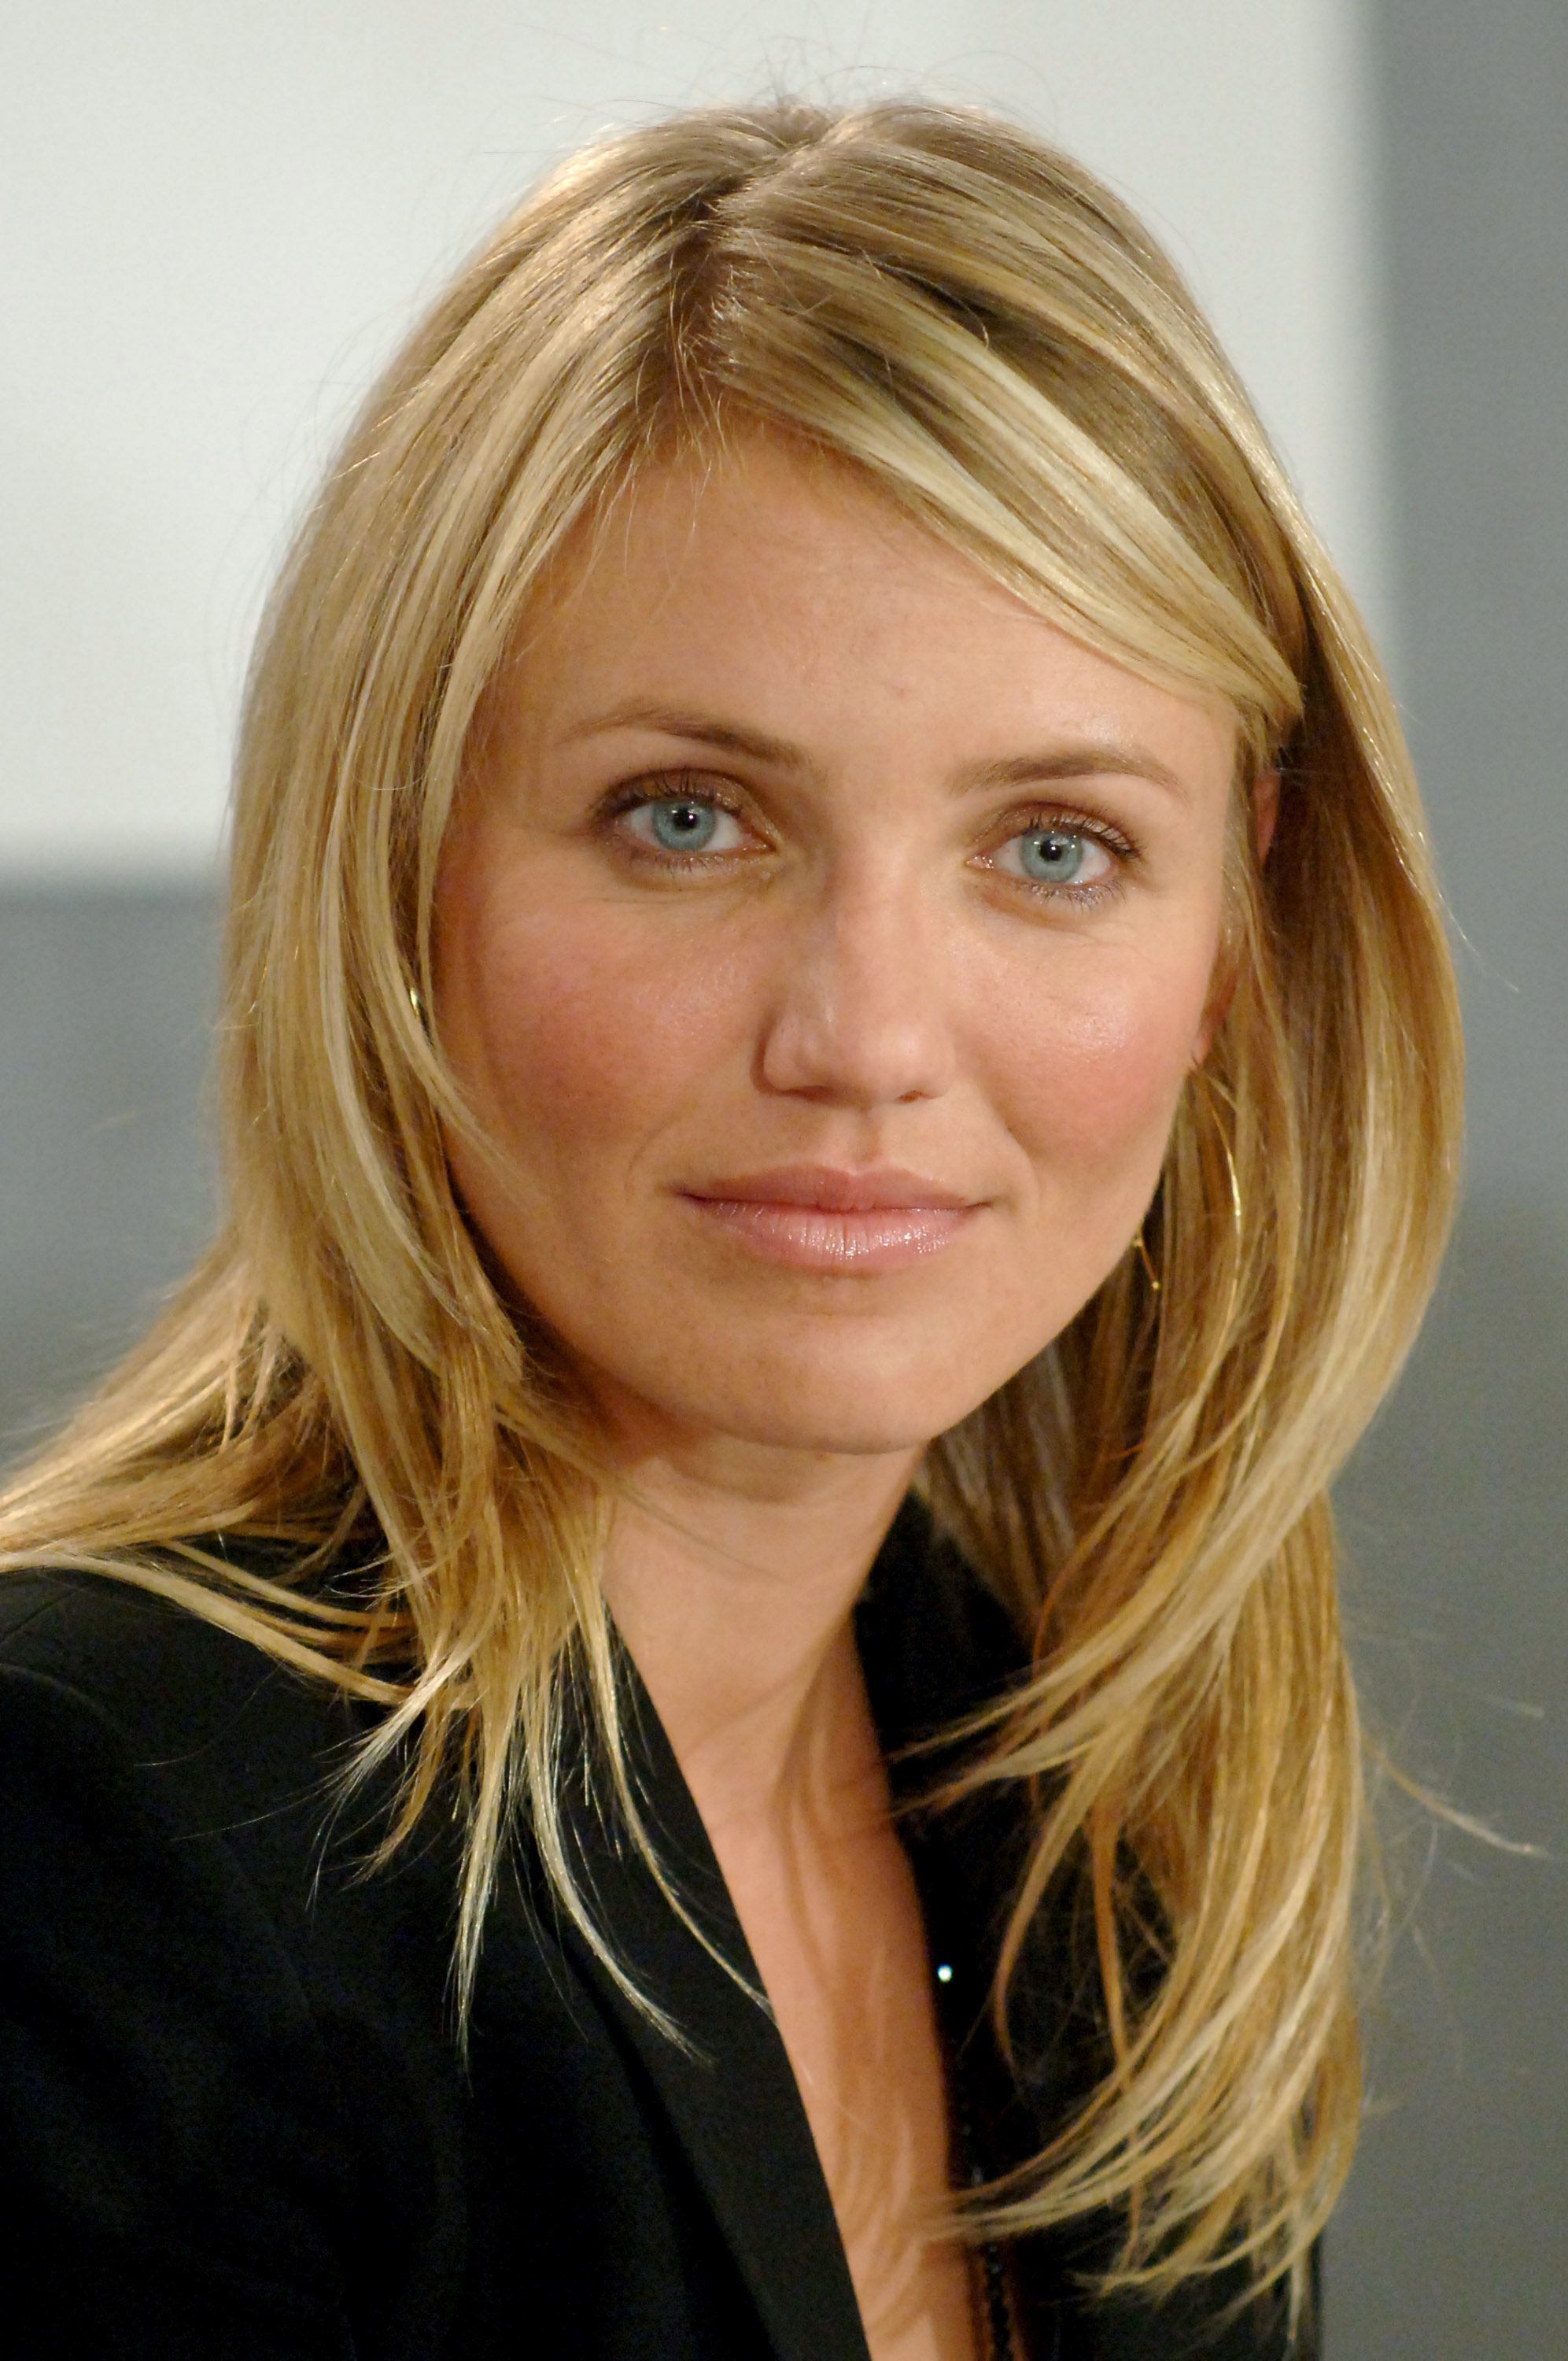 Cameron Diaz attends the 2005 Toronto Film Festival - "In Her Shoes" press conference in Toronto, Canada | Source: Getty Images